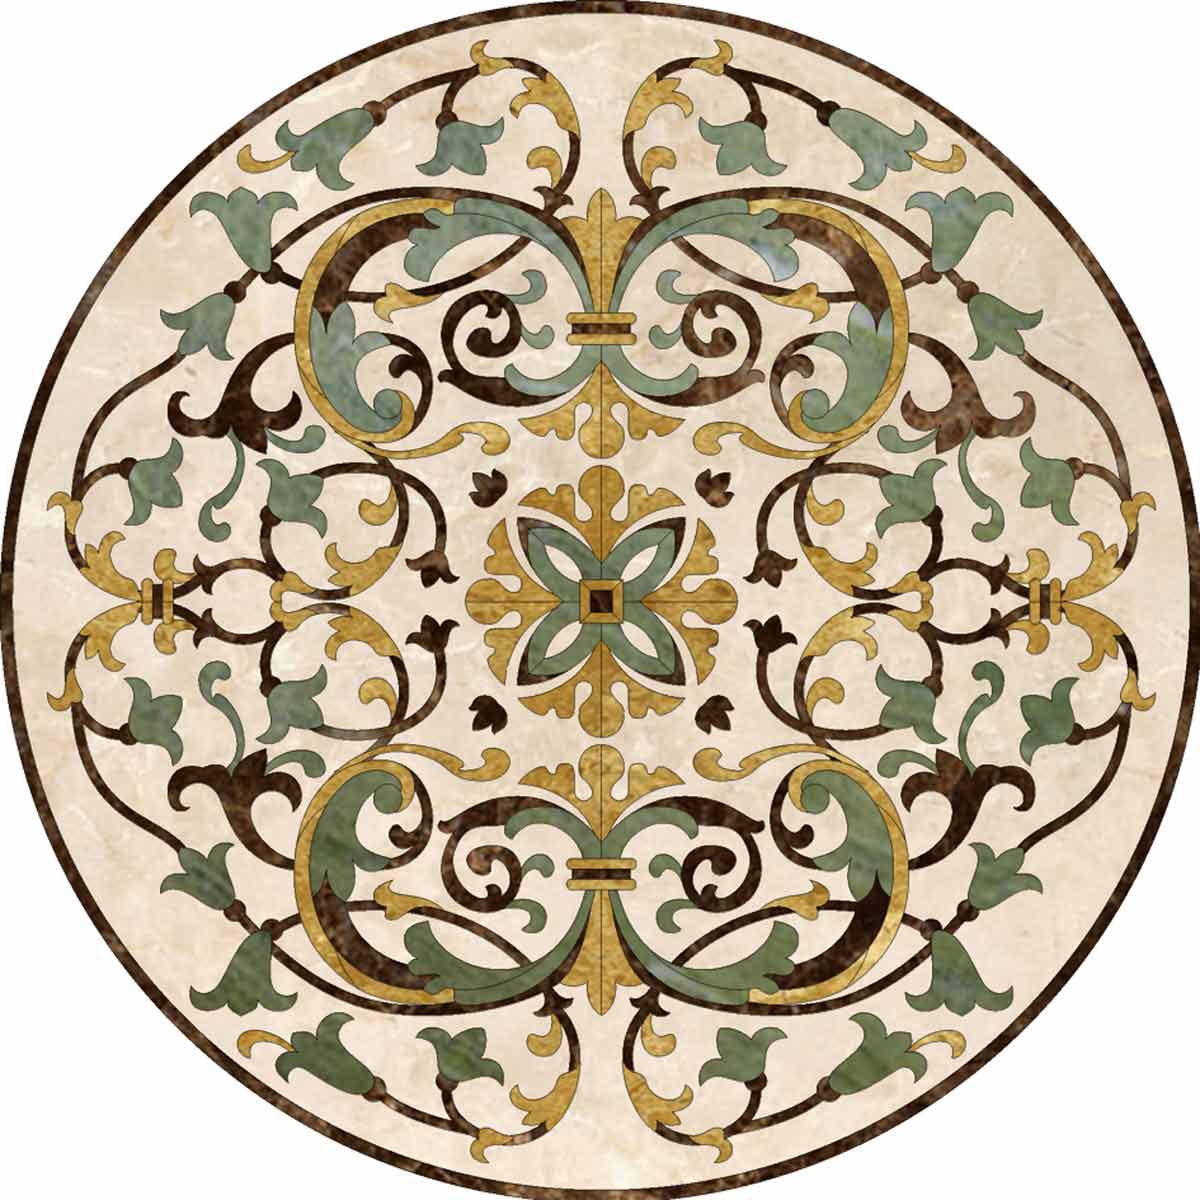 Large view of the floor design